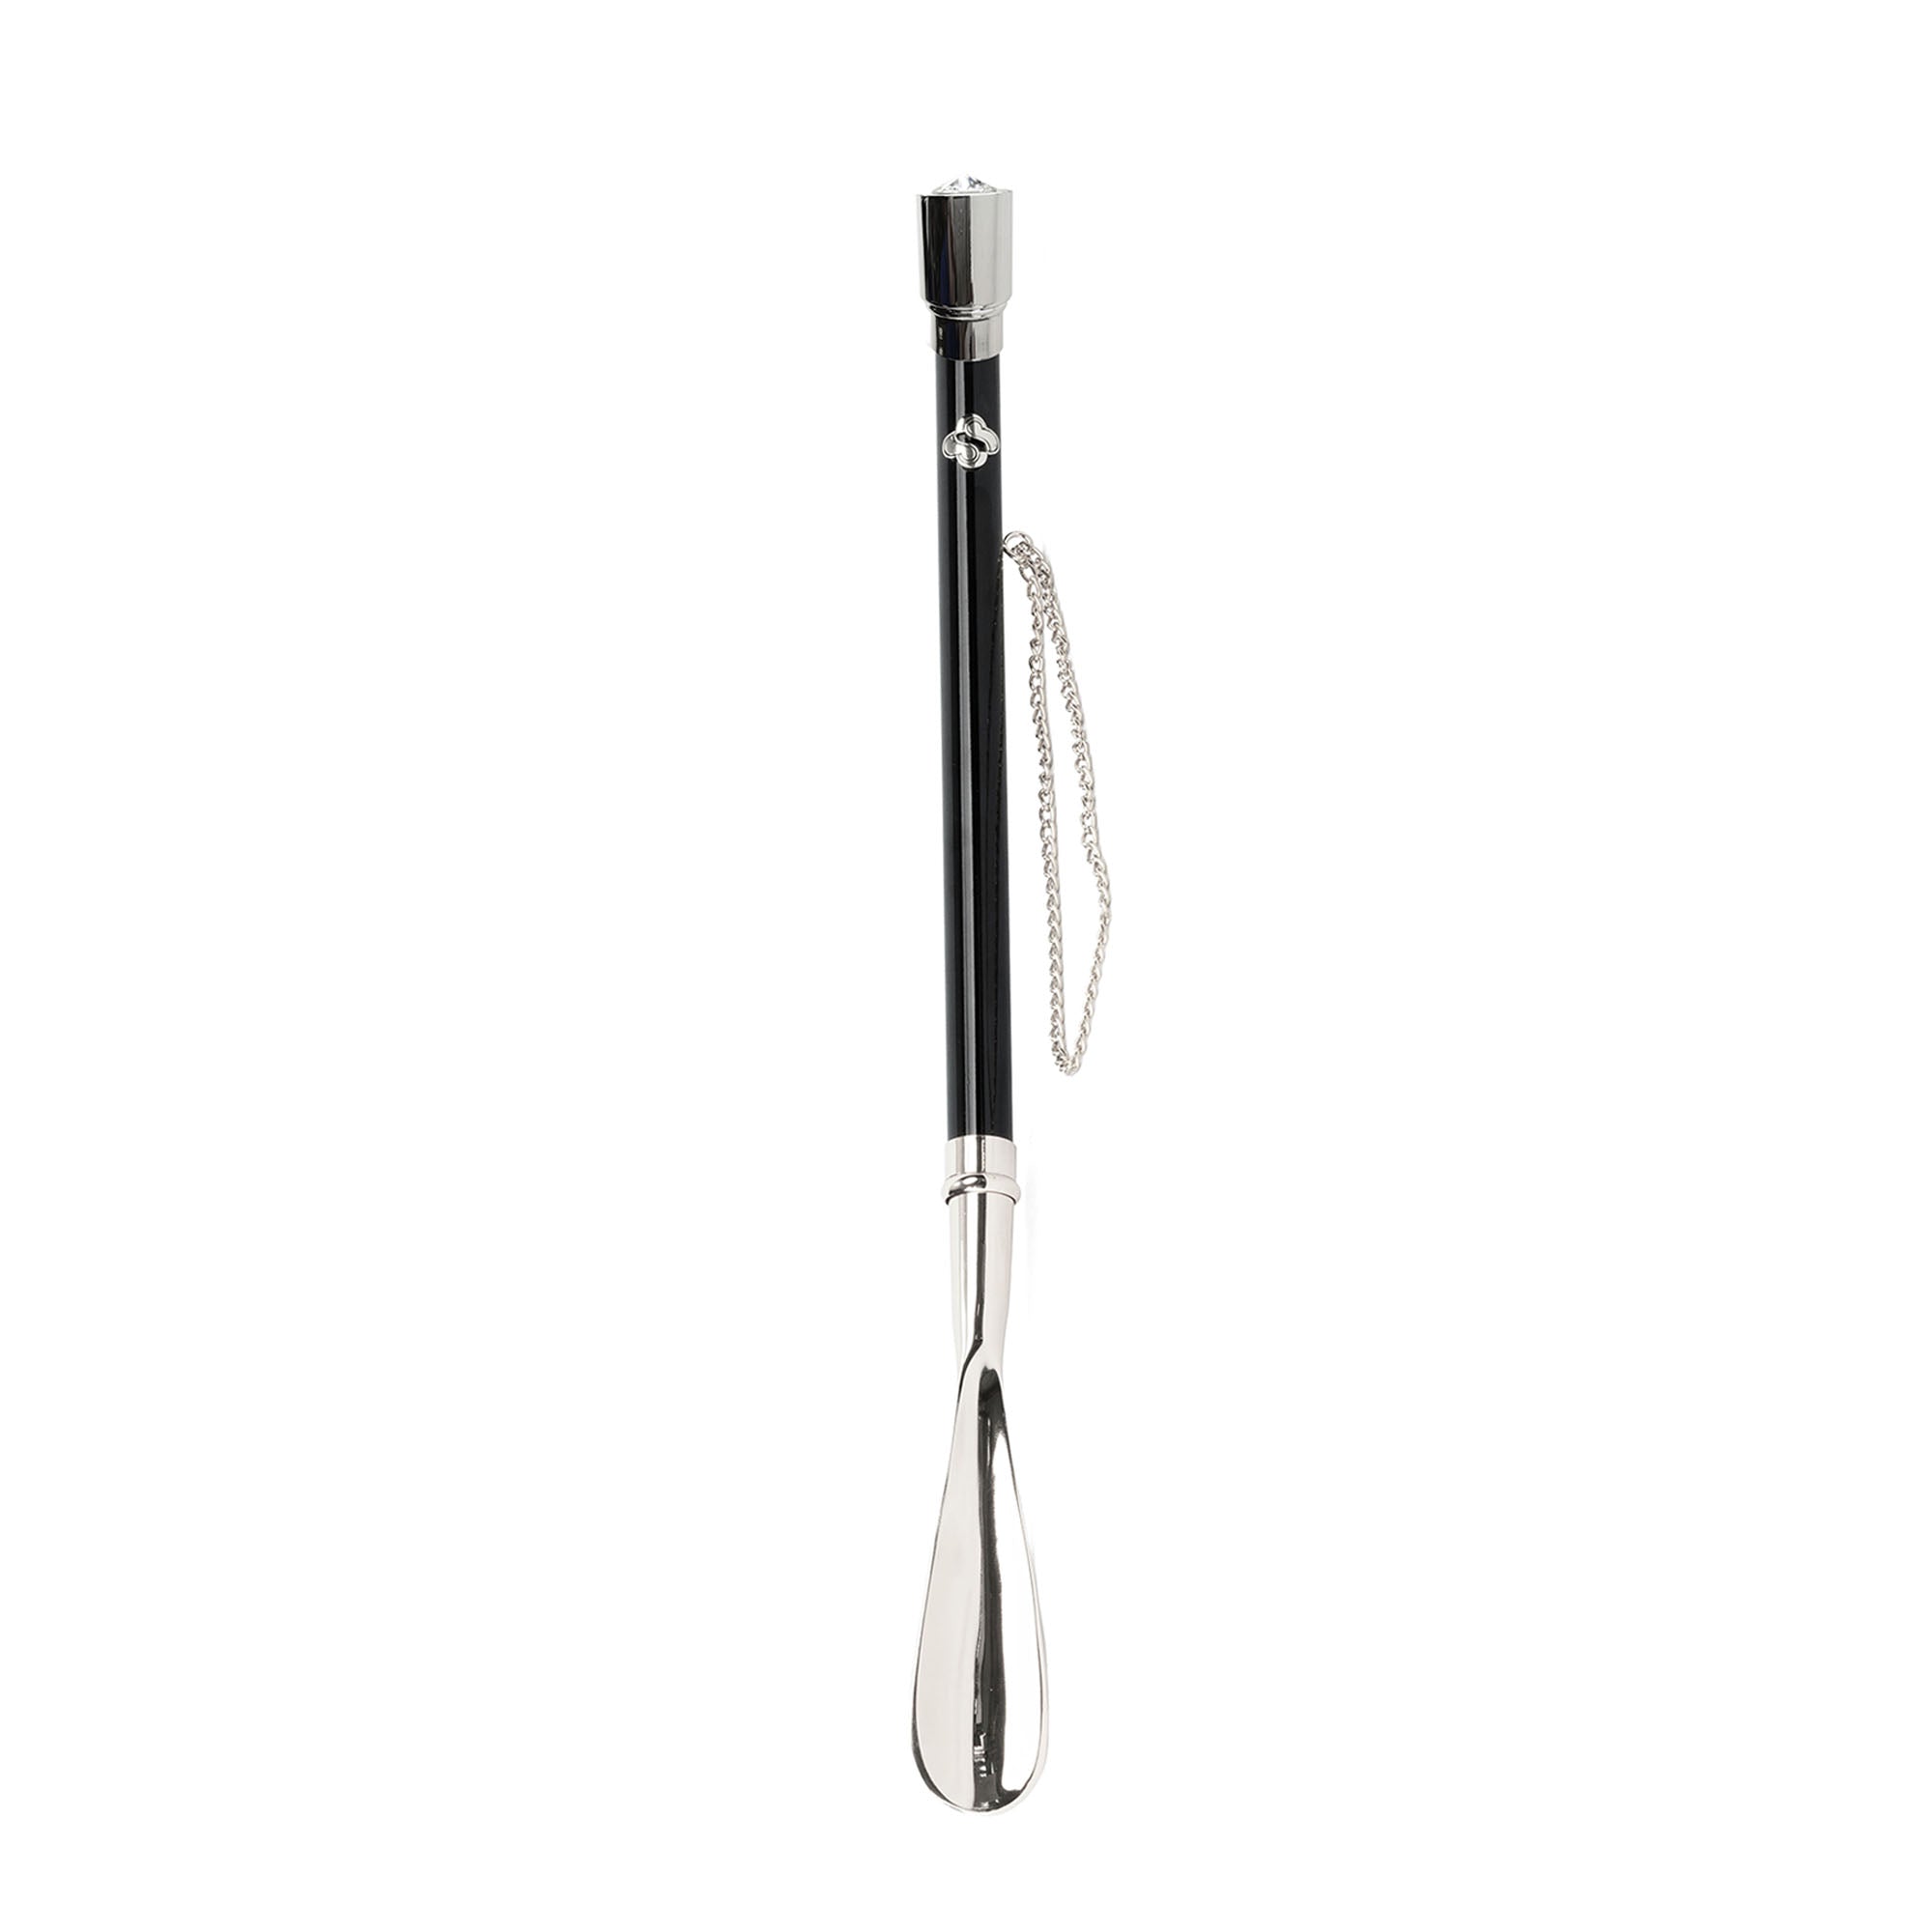 Simple and elegant shoehorn - silverplated 925